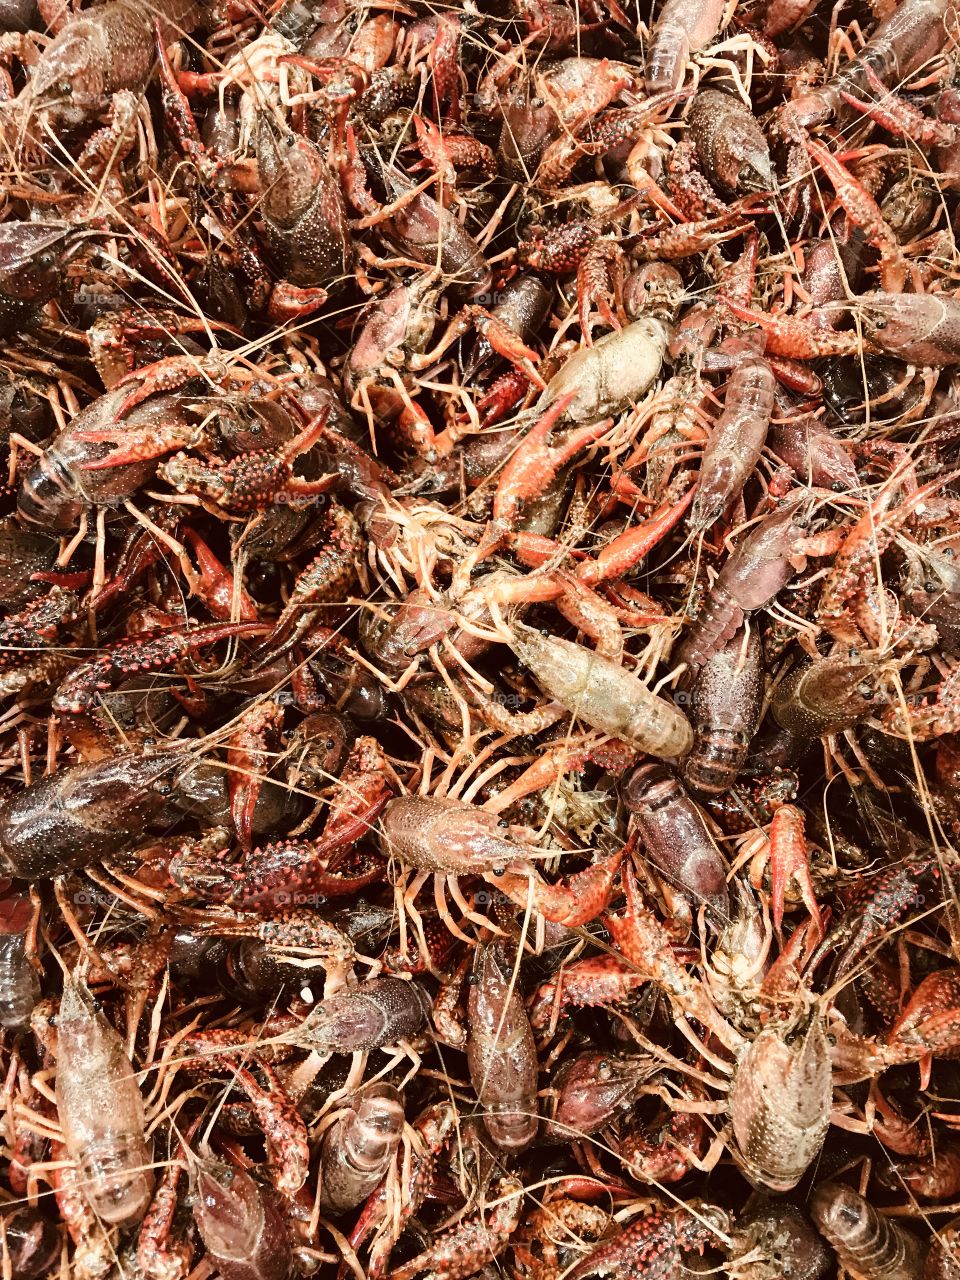 Lots of little Crayfish - Seafood dinner 